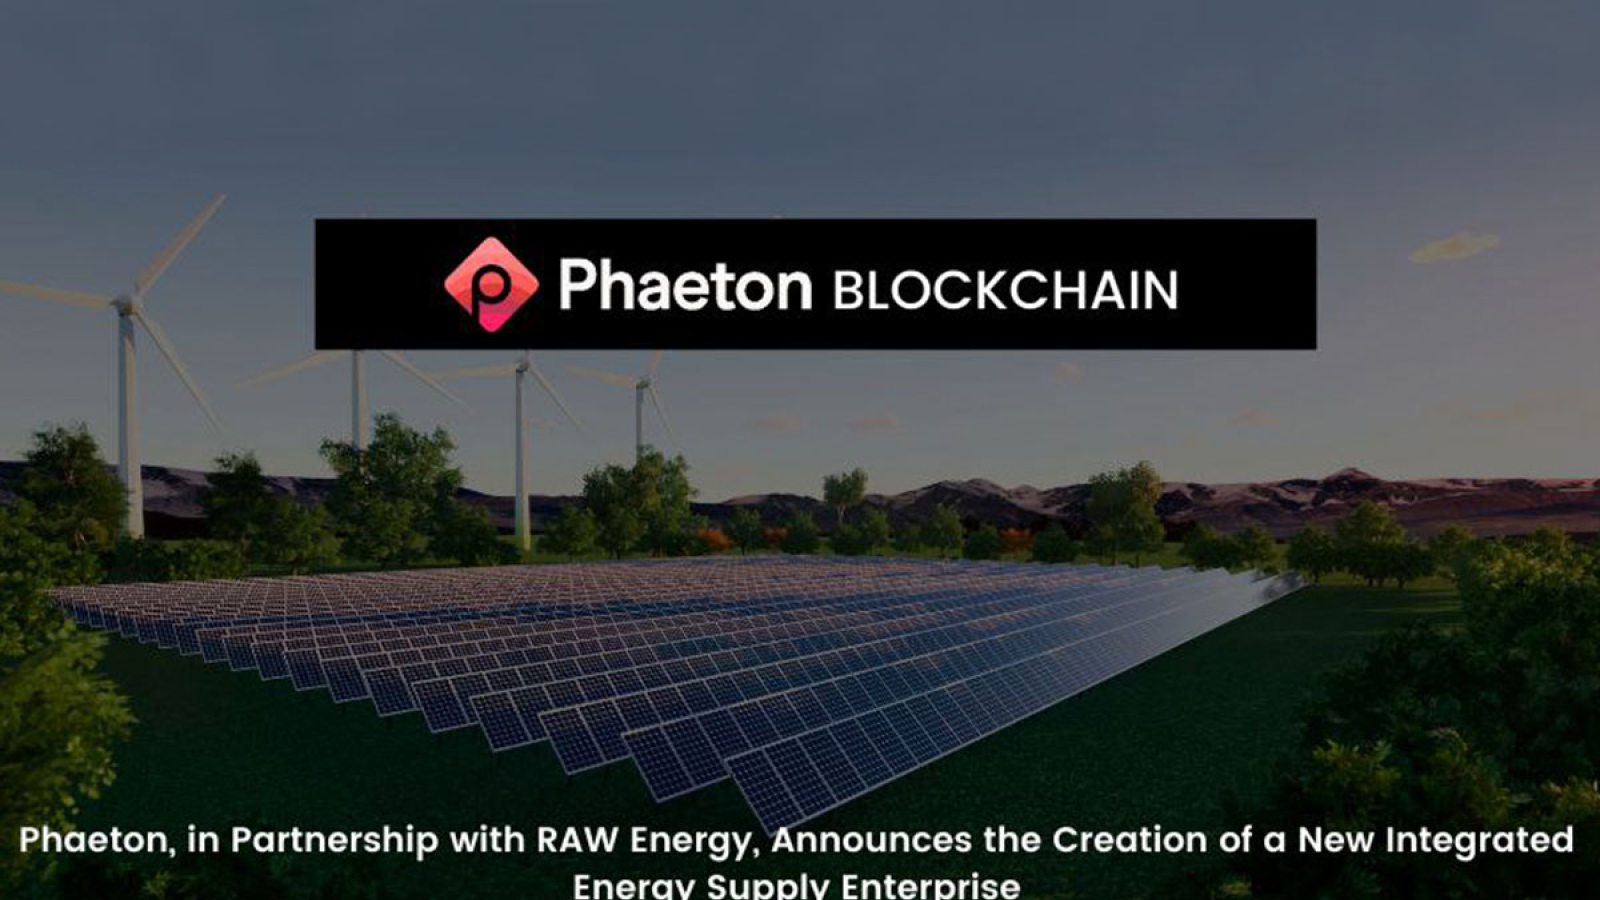 Phaeton, in Partnership with RAW Energy, Announces the Creation of a New Integrated Energy Supply Enterprise